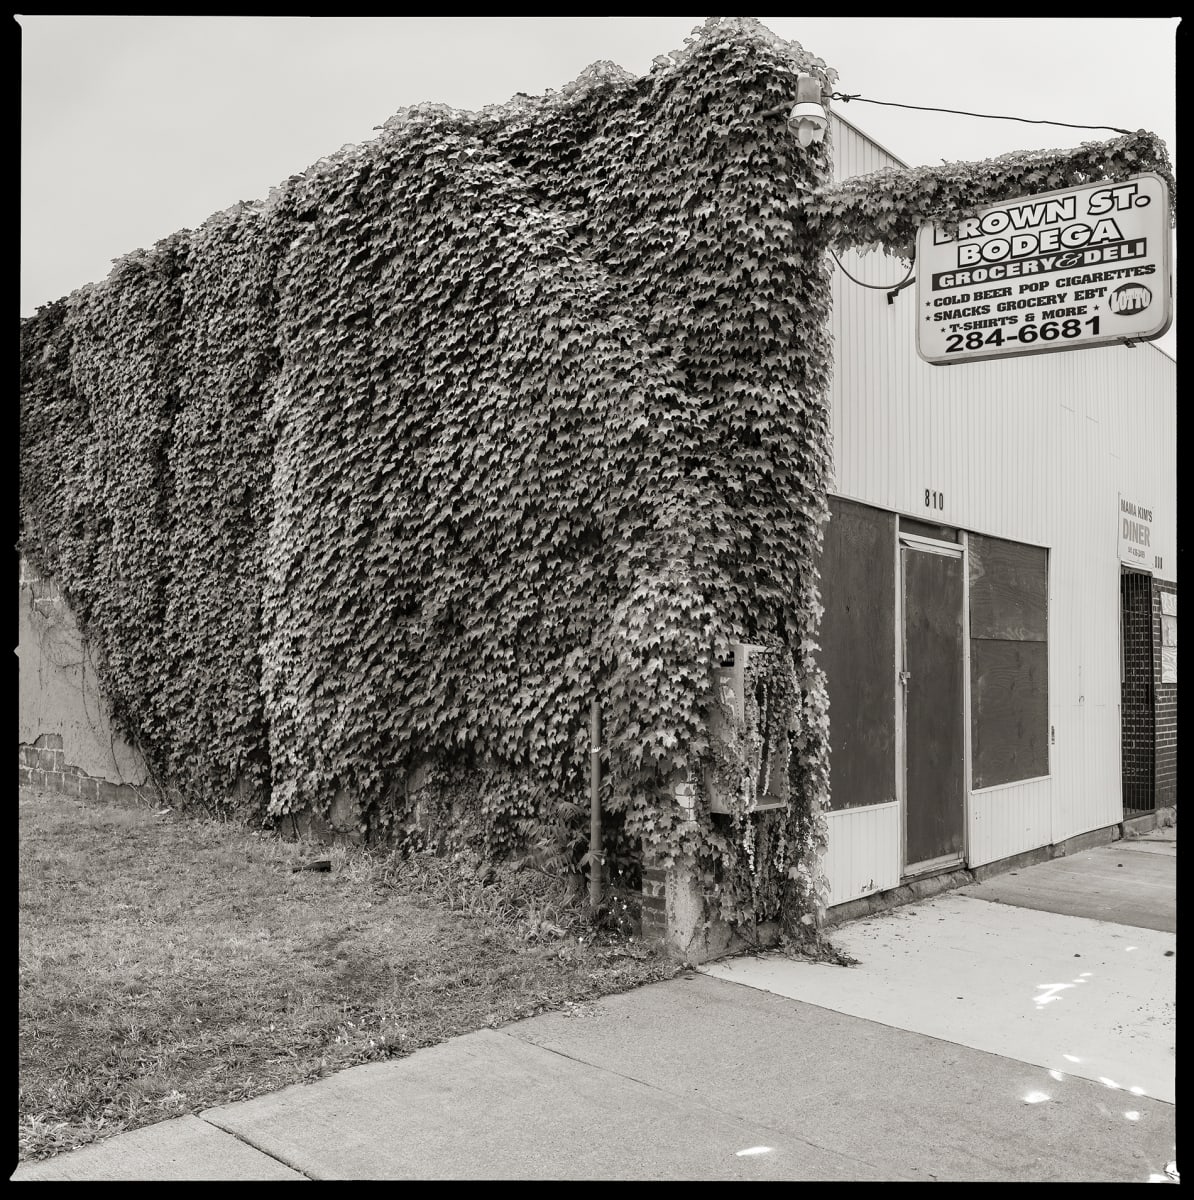 585.235.9596 – Shaibe Grocery, 810 Brown Street, Rochester, NY 14611 by Eric T. Kunsman  Image: ID: A black and white image shows a corner building where the left half is covered in vines and ivy. The ivy covers a payphone.  The right side of the building is sided and closed up.